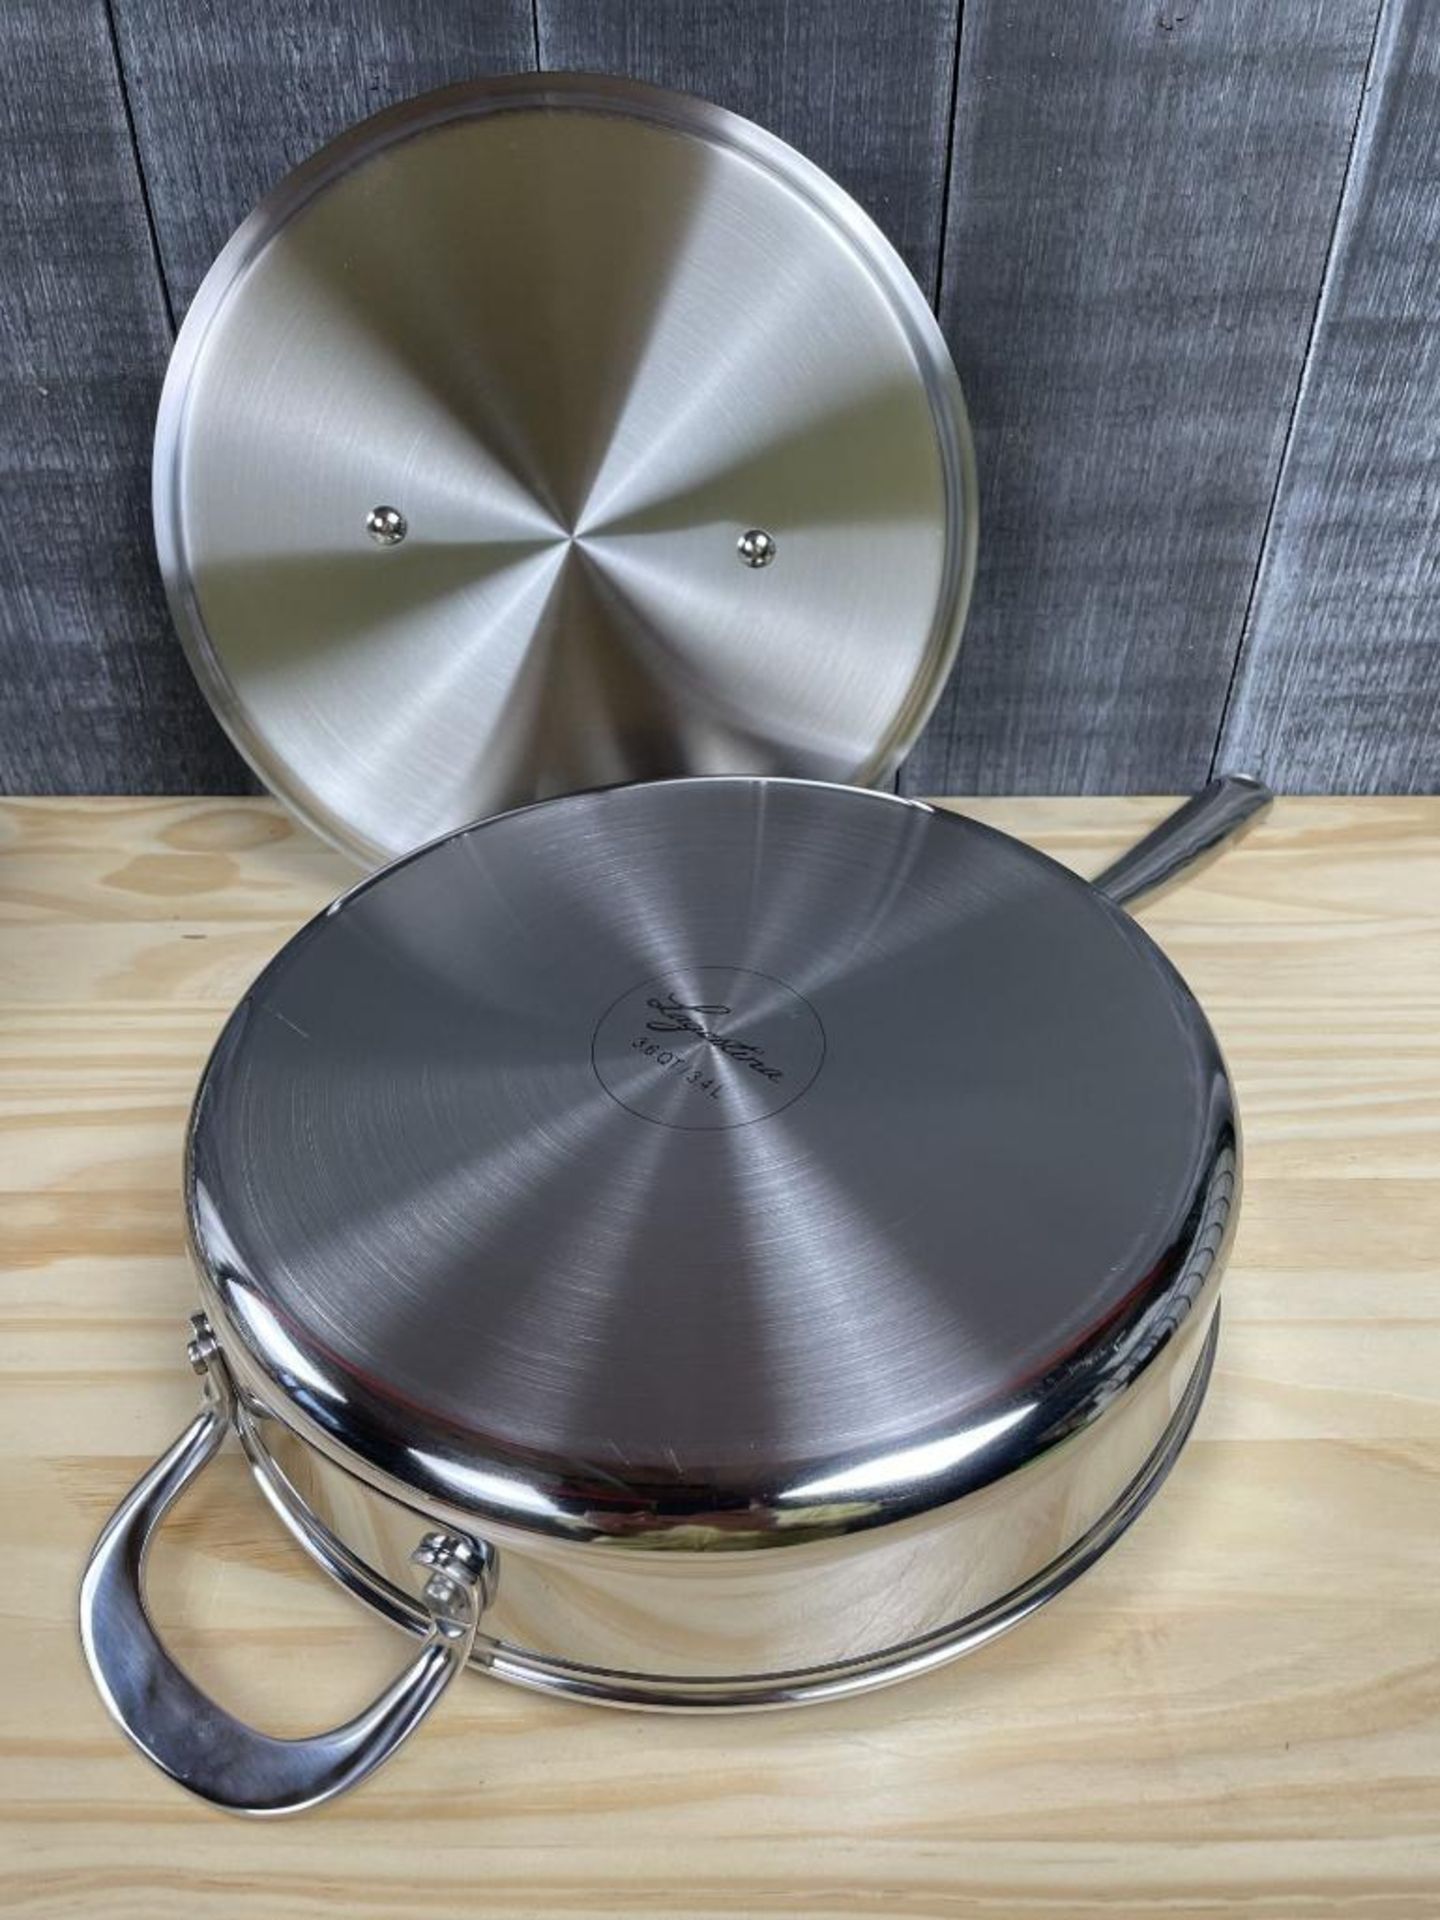 LAGOSTINA 3-PLY STAINLESS STEEL CLAD 3.4L SAUTE PAN WITH COVER - Image 3 of 3